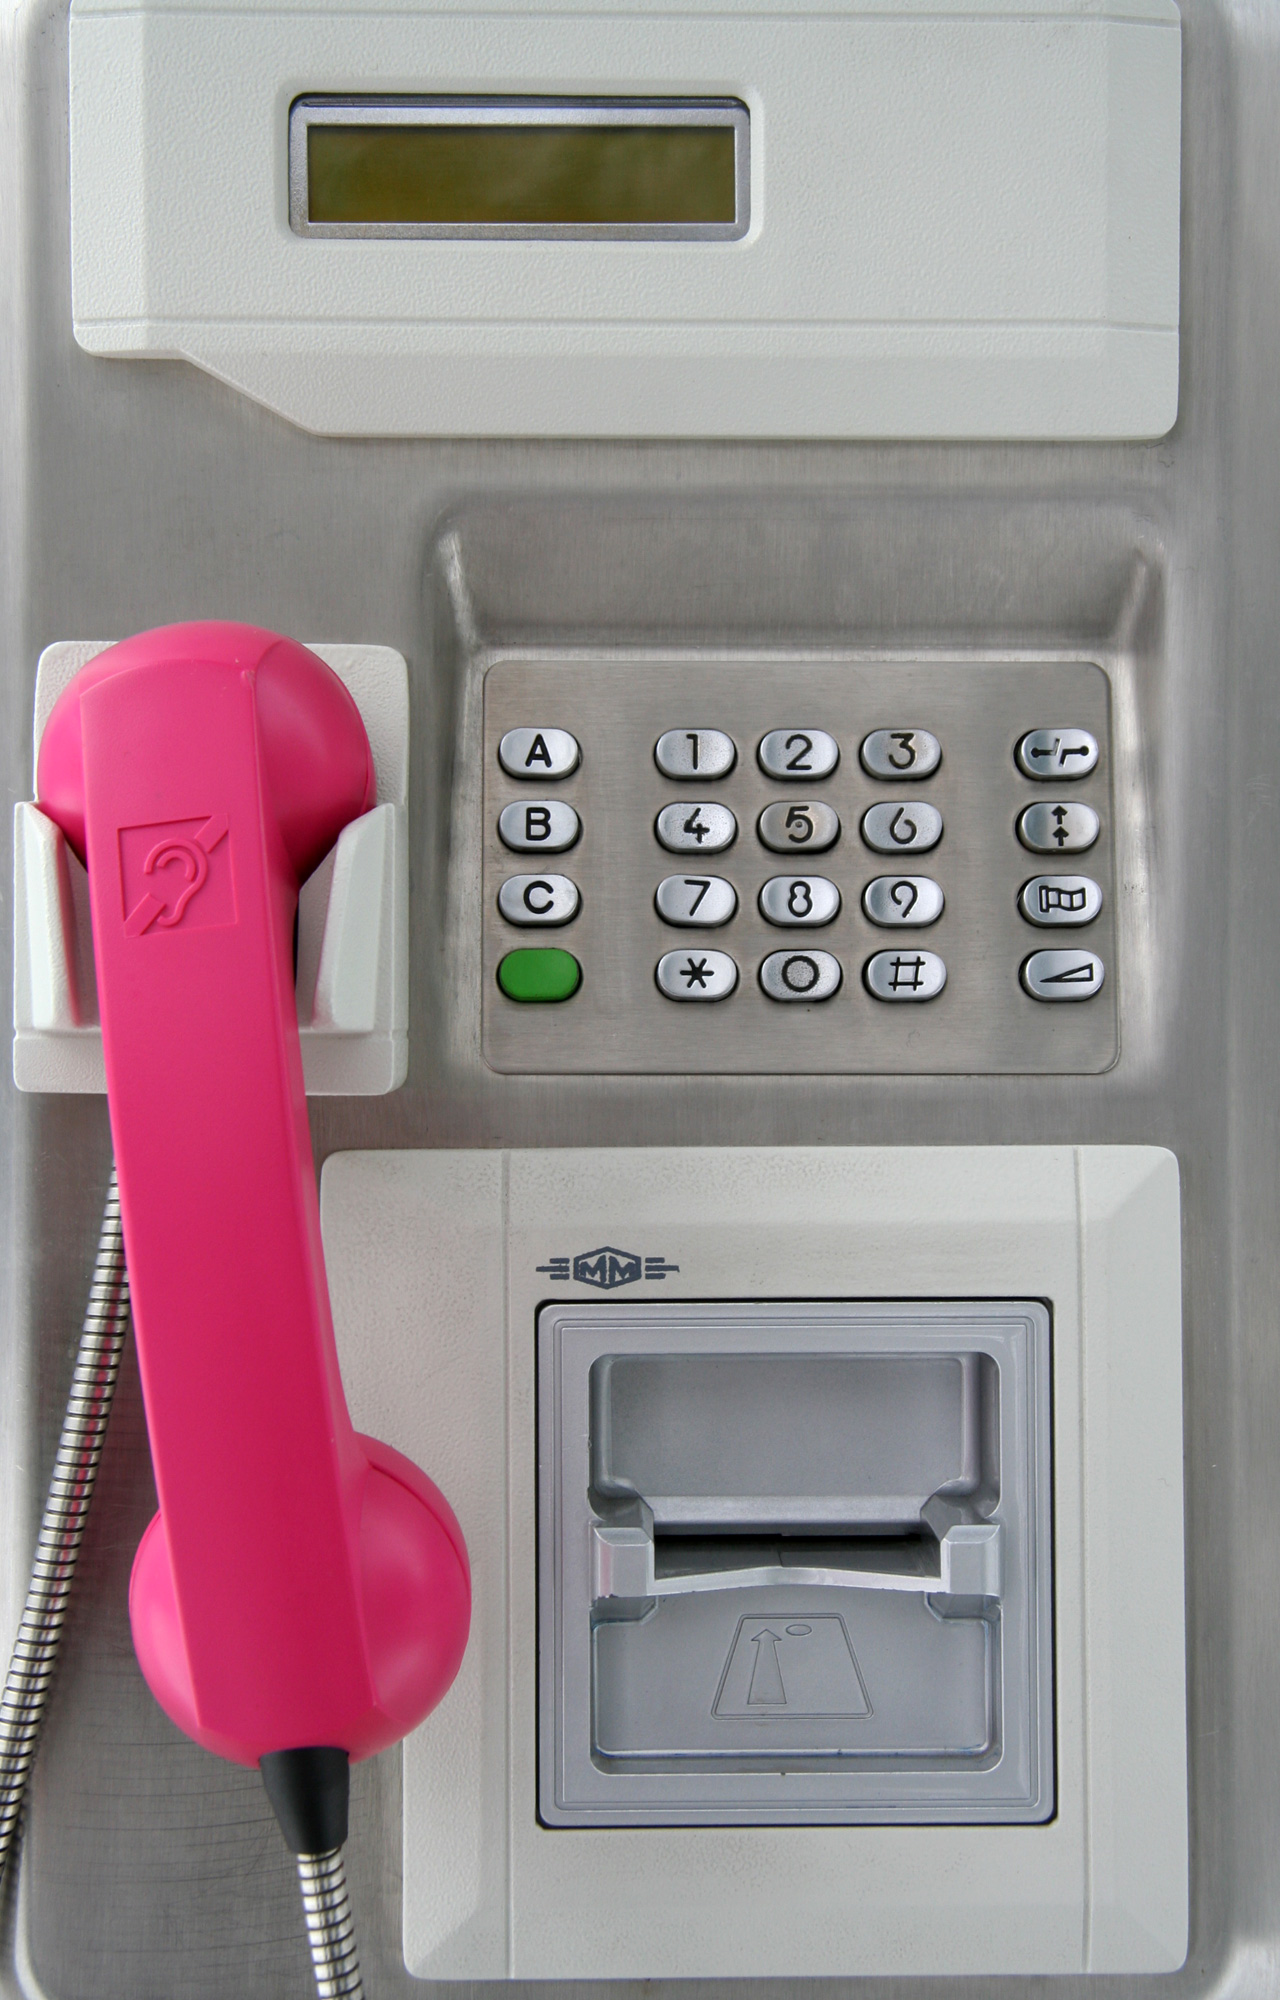 Payphone with pink handset